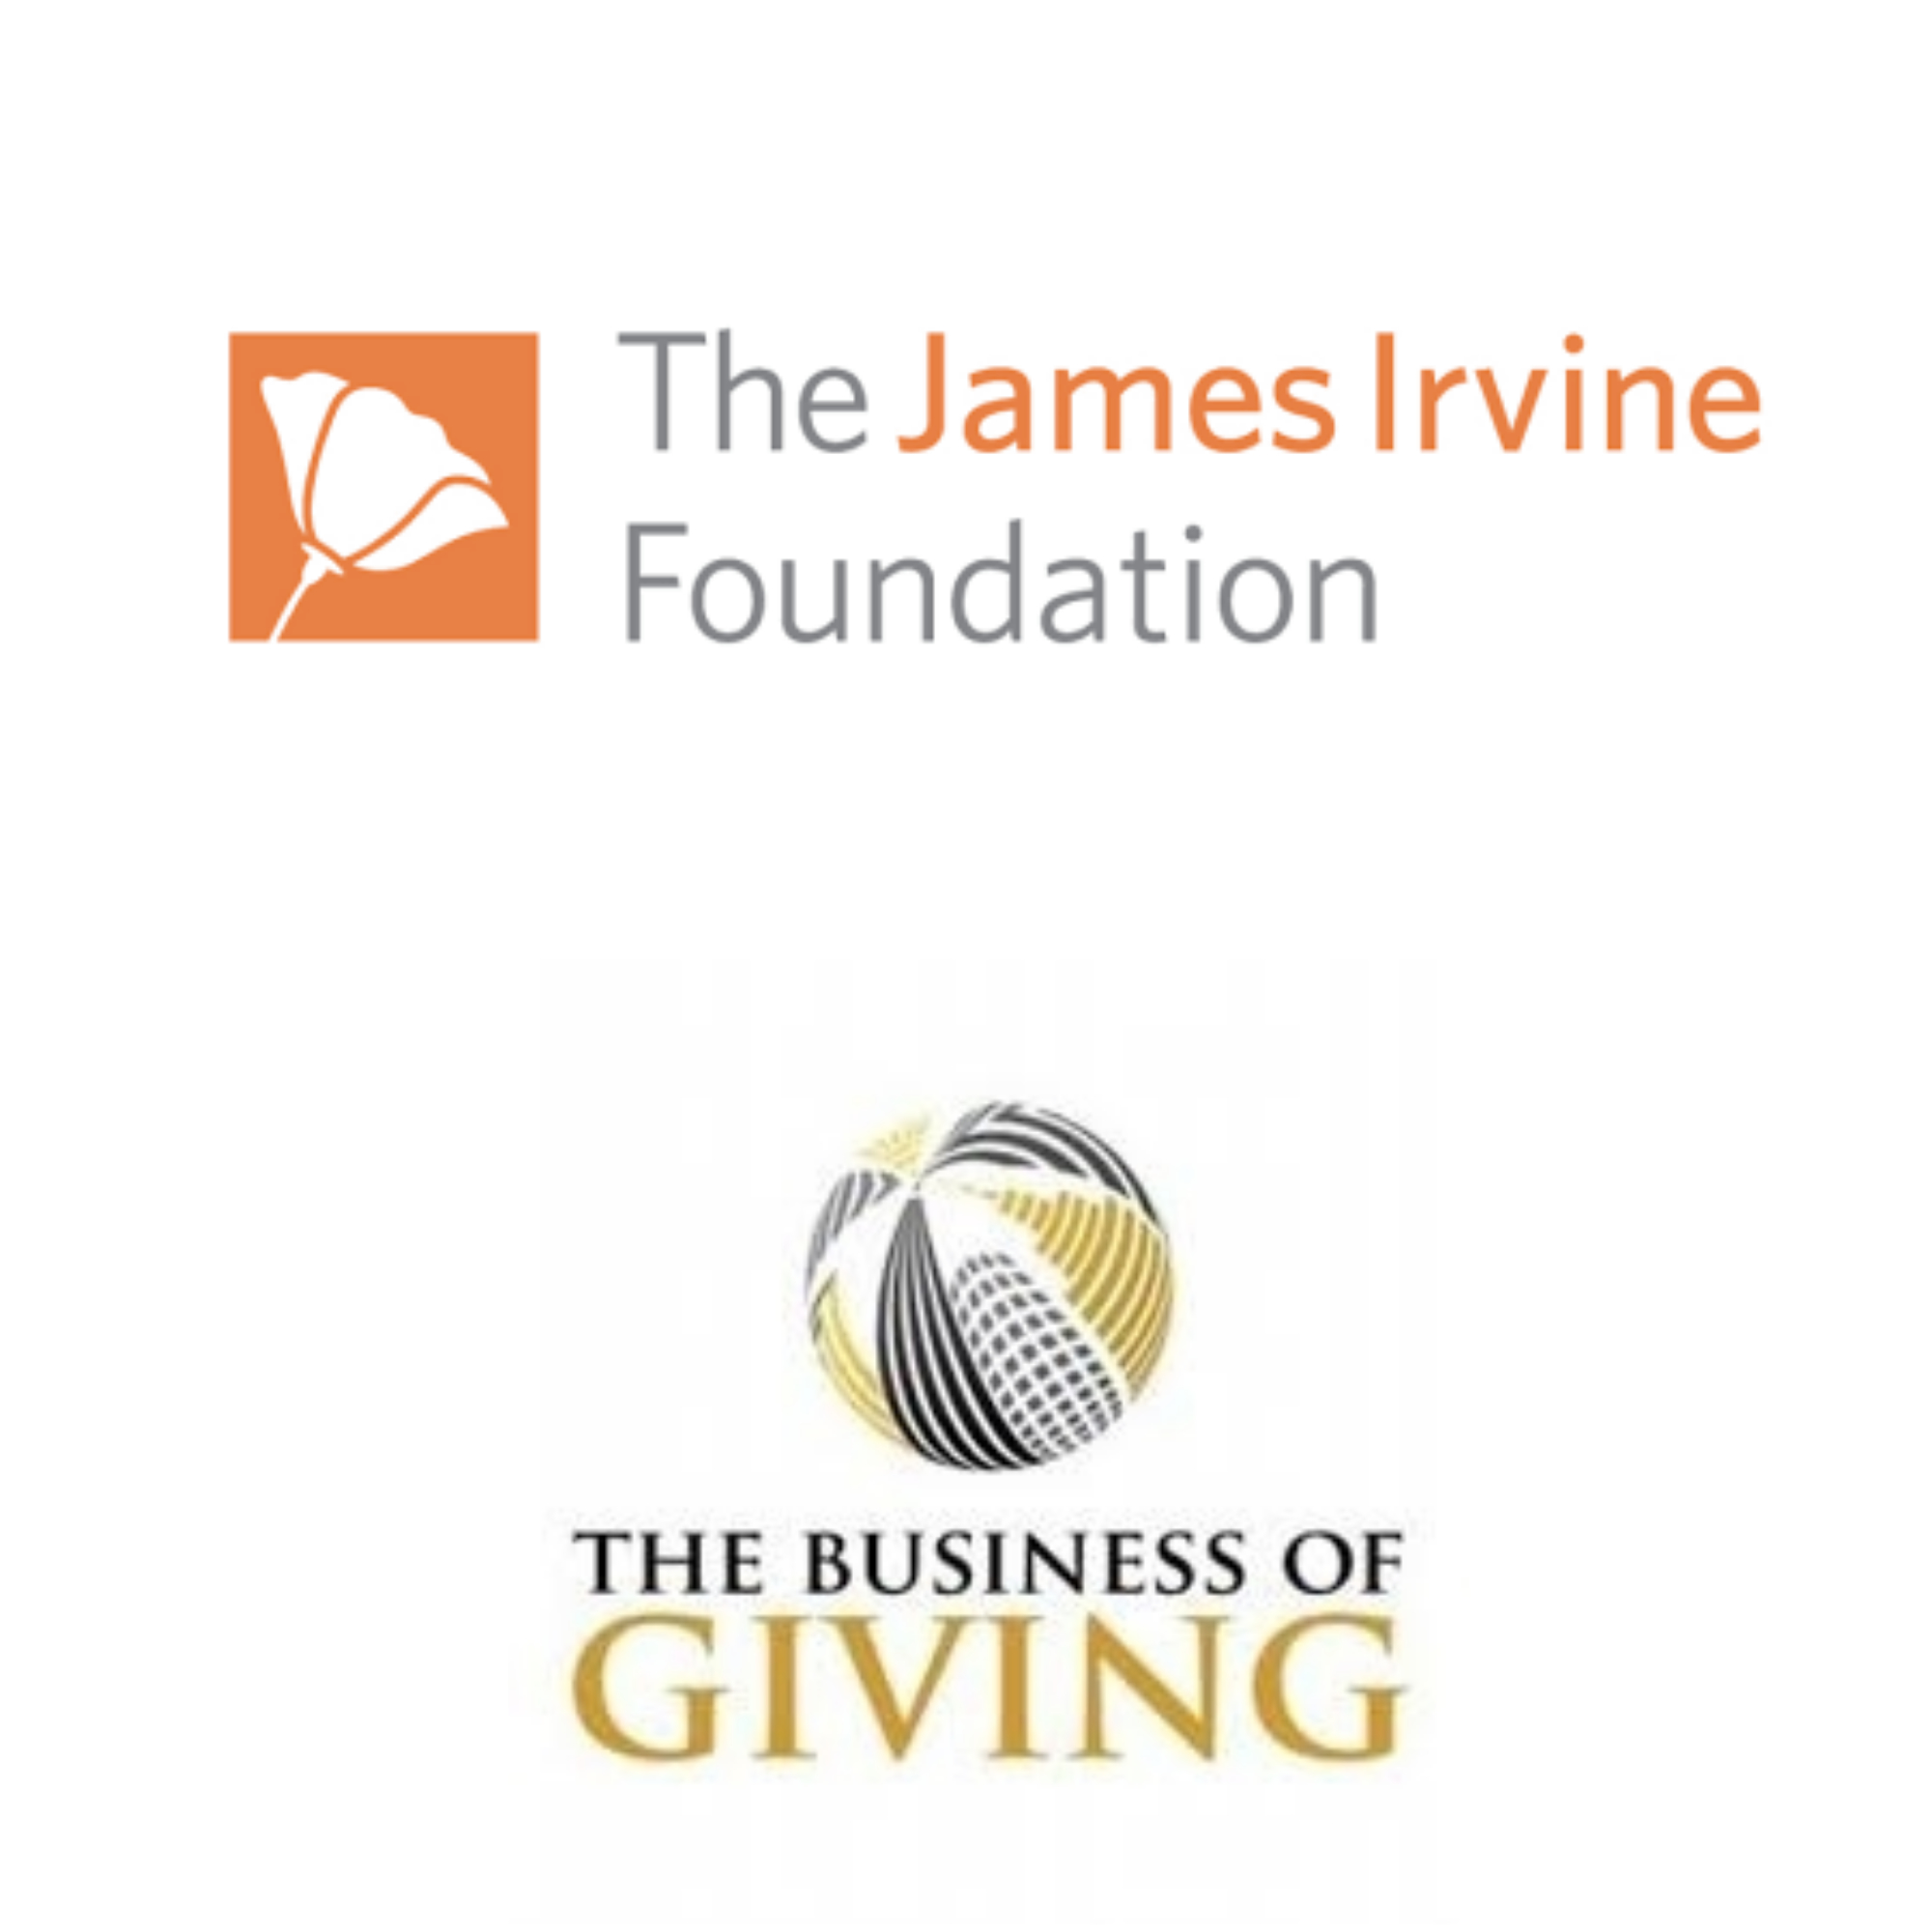 Don Howard, the President and Chief Executive Officer of the James Irvine Foundation